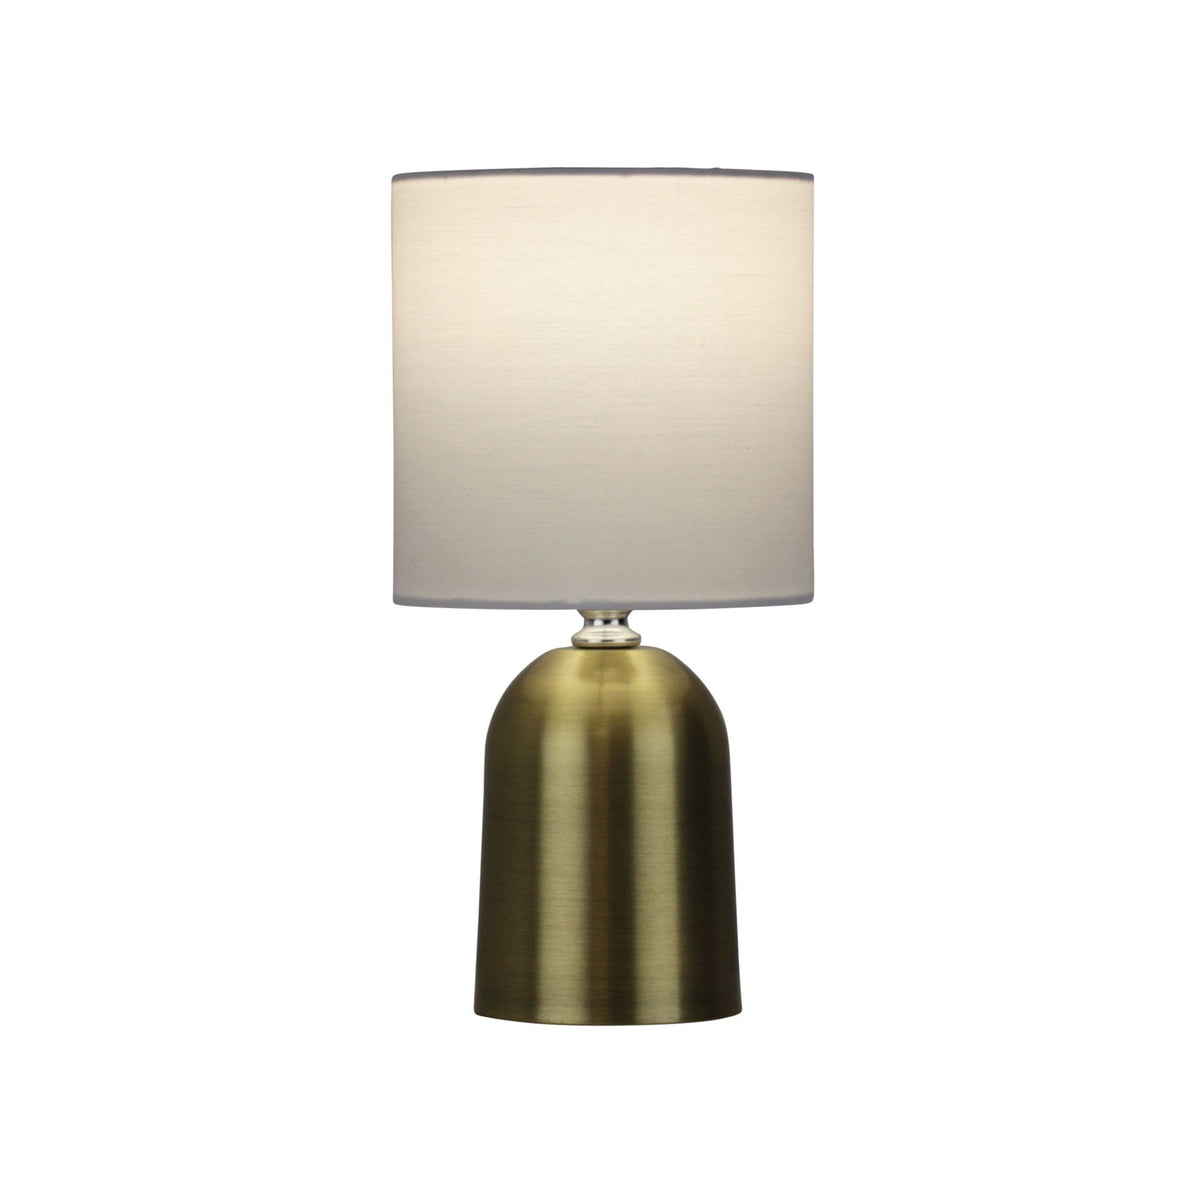 Espen On / Off Touch Lamp In Antique Brass Finish - Table Lamp - Lux Lighting